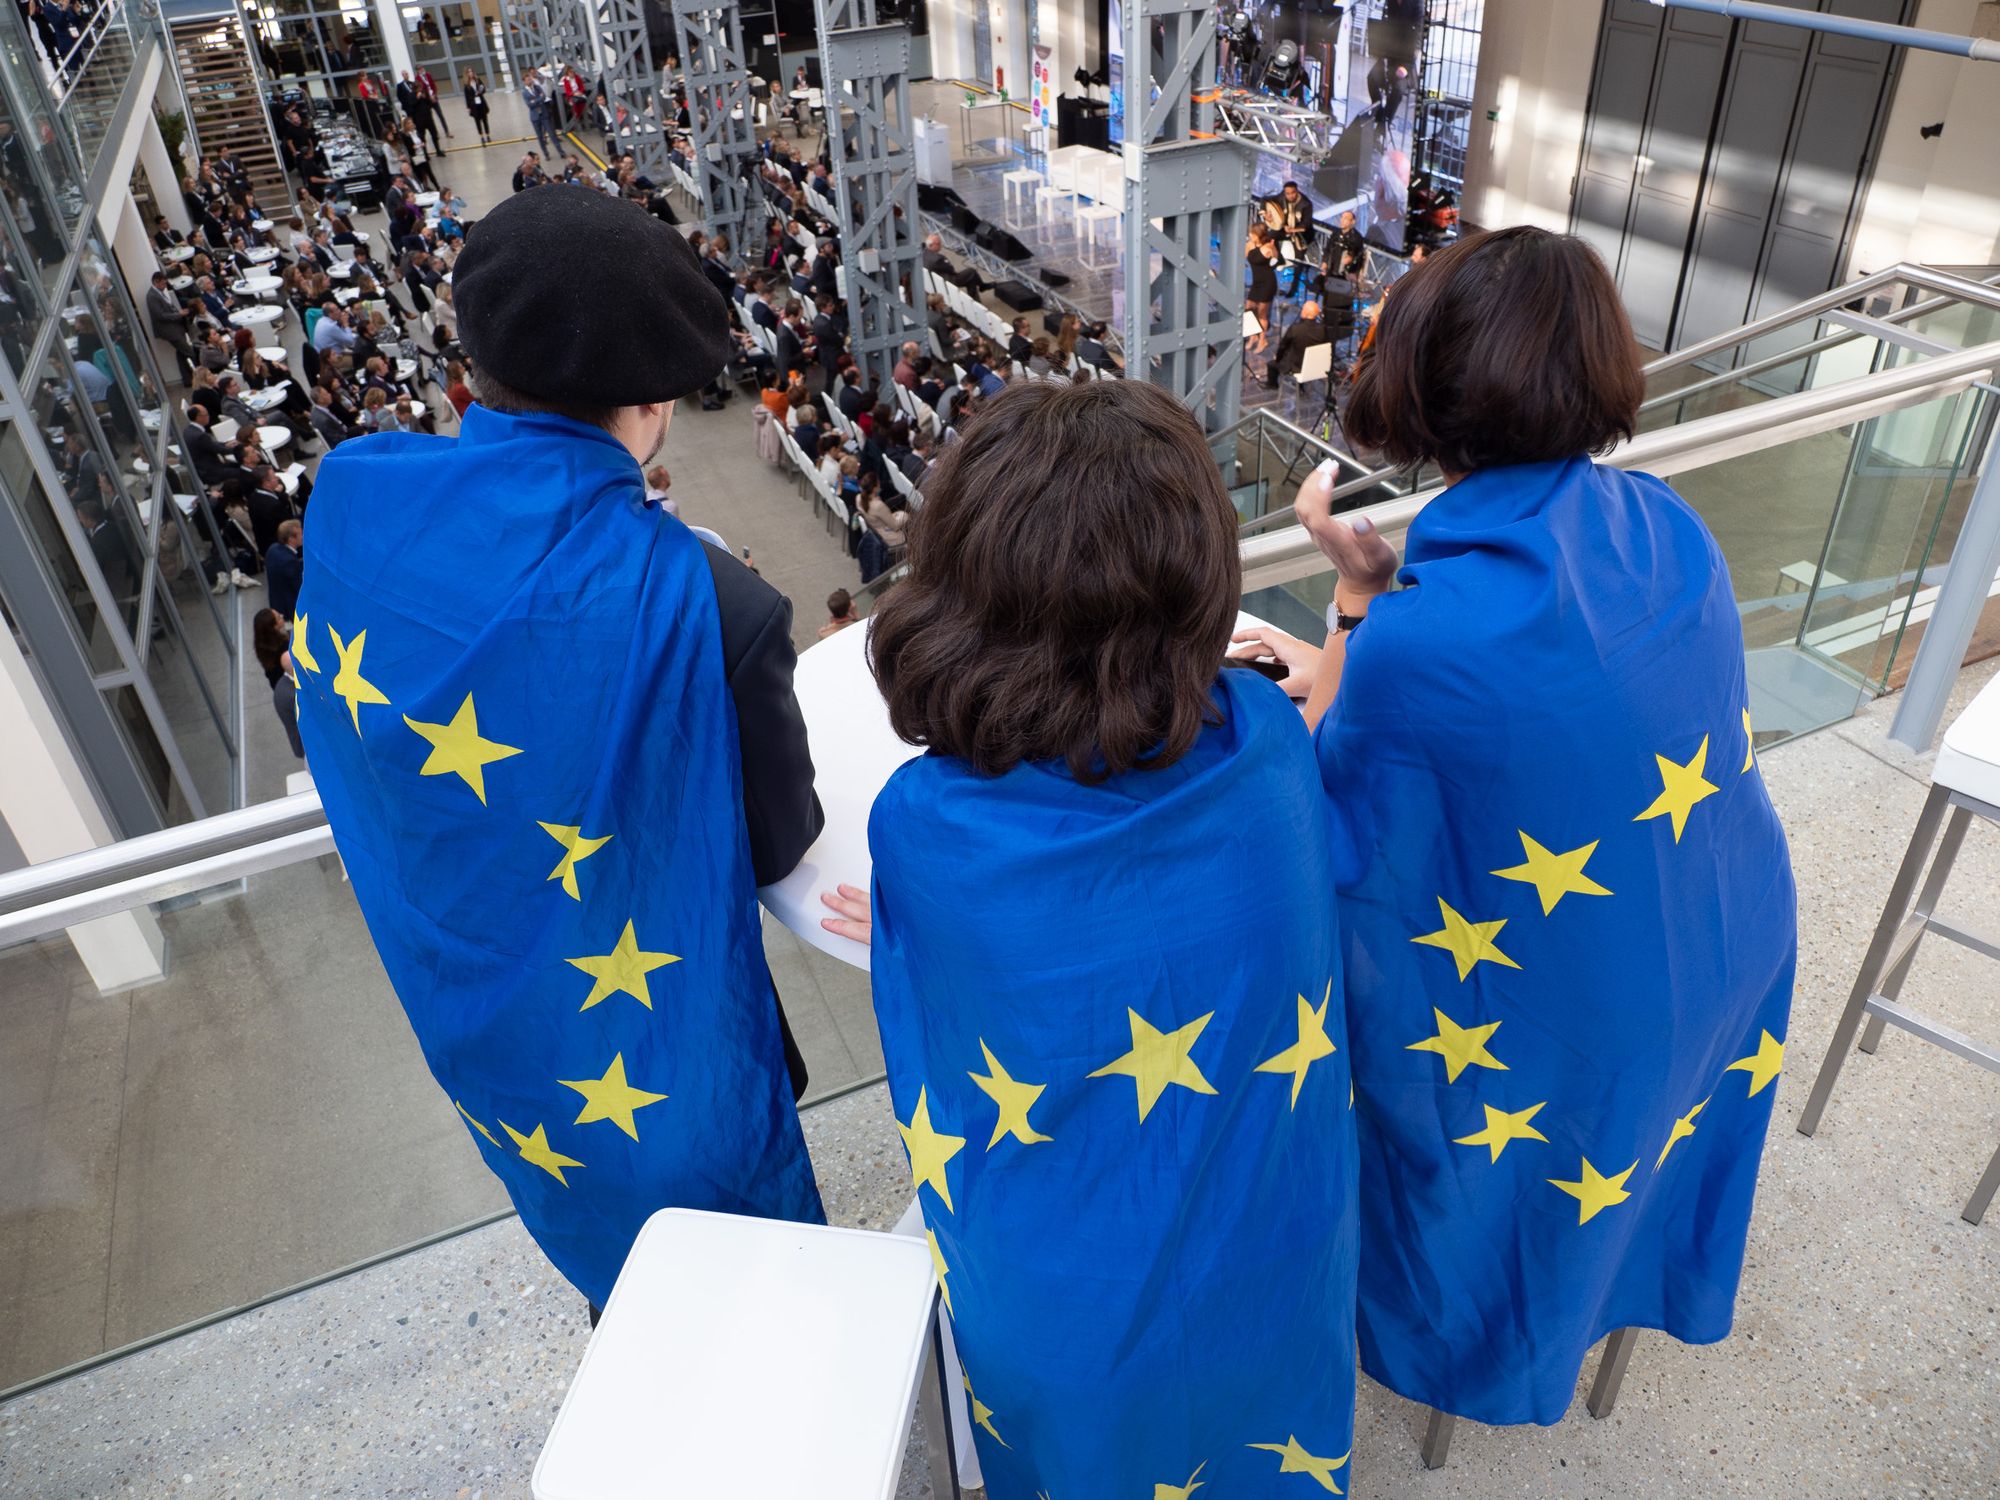 Three people at the 2018 Fundamental Rights Forum, wearing EU Flags